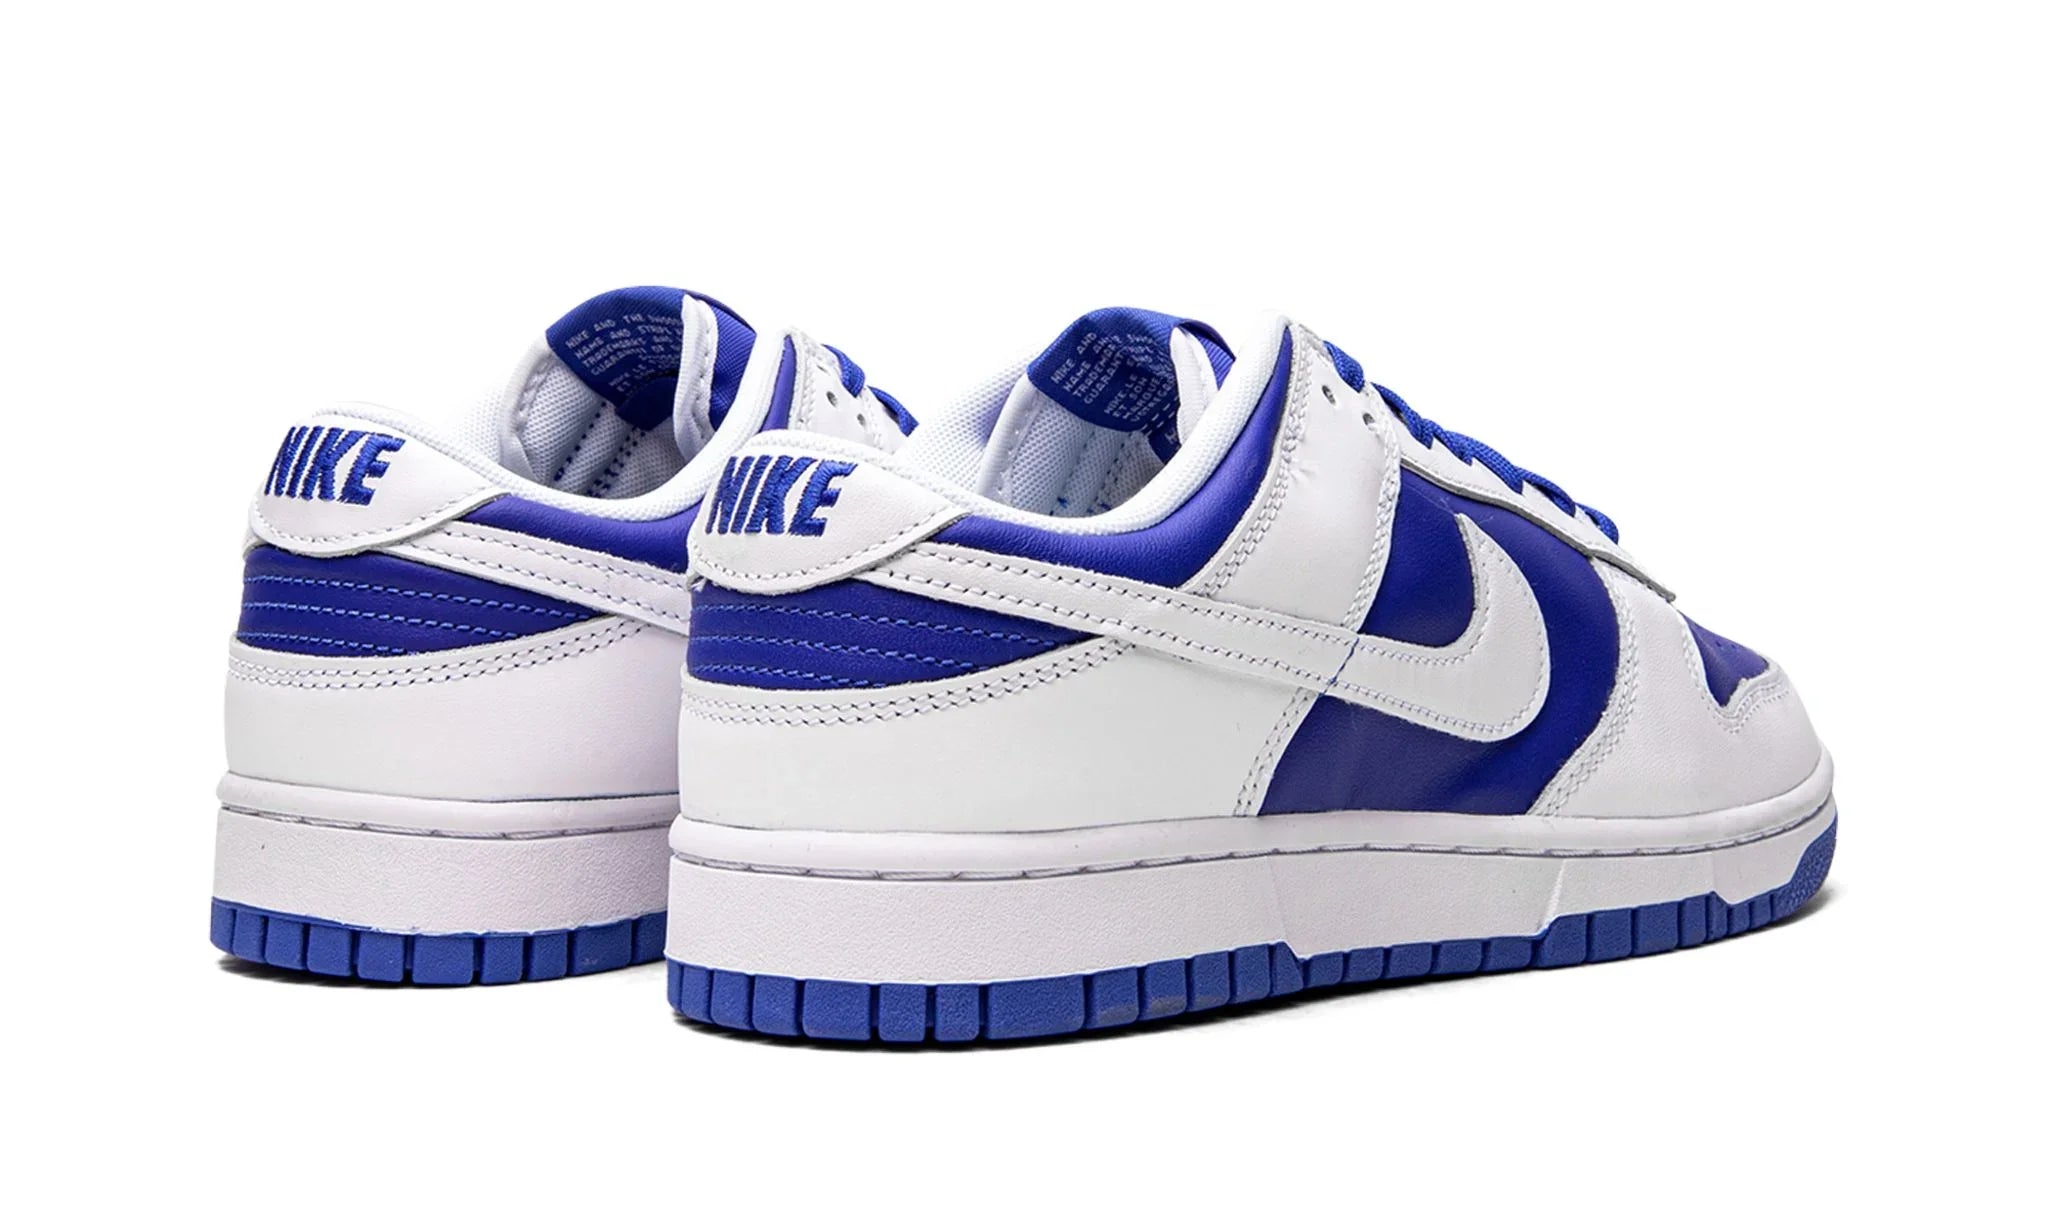 Nike Dunk Low "Racer Blue White" - DD1391-401 - Sneakers